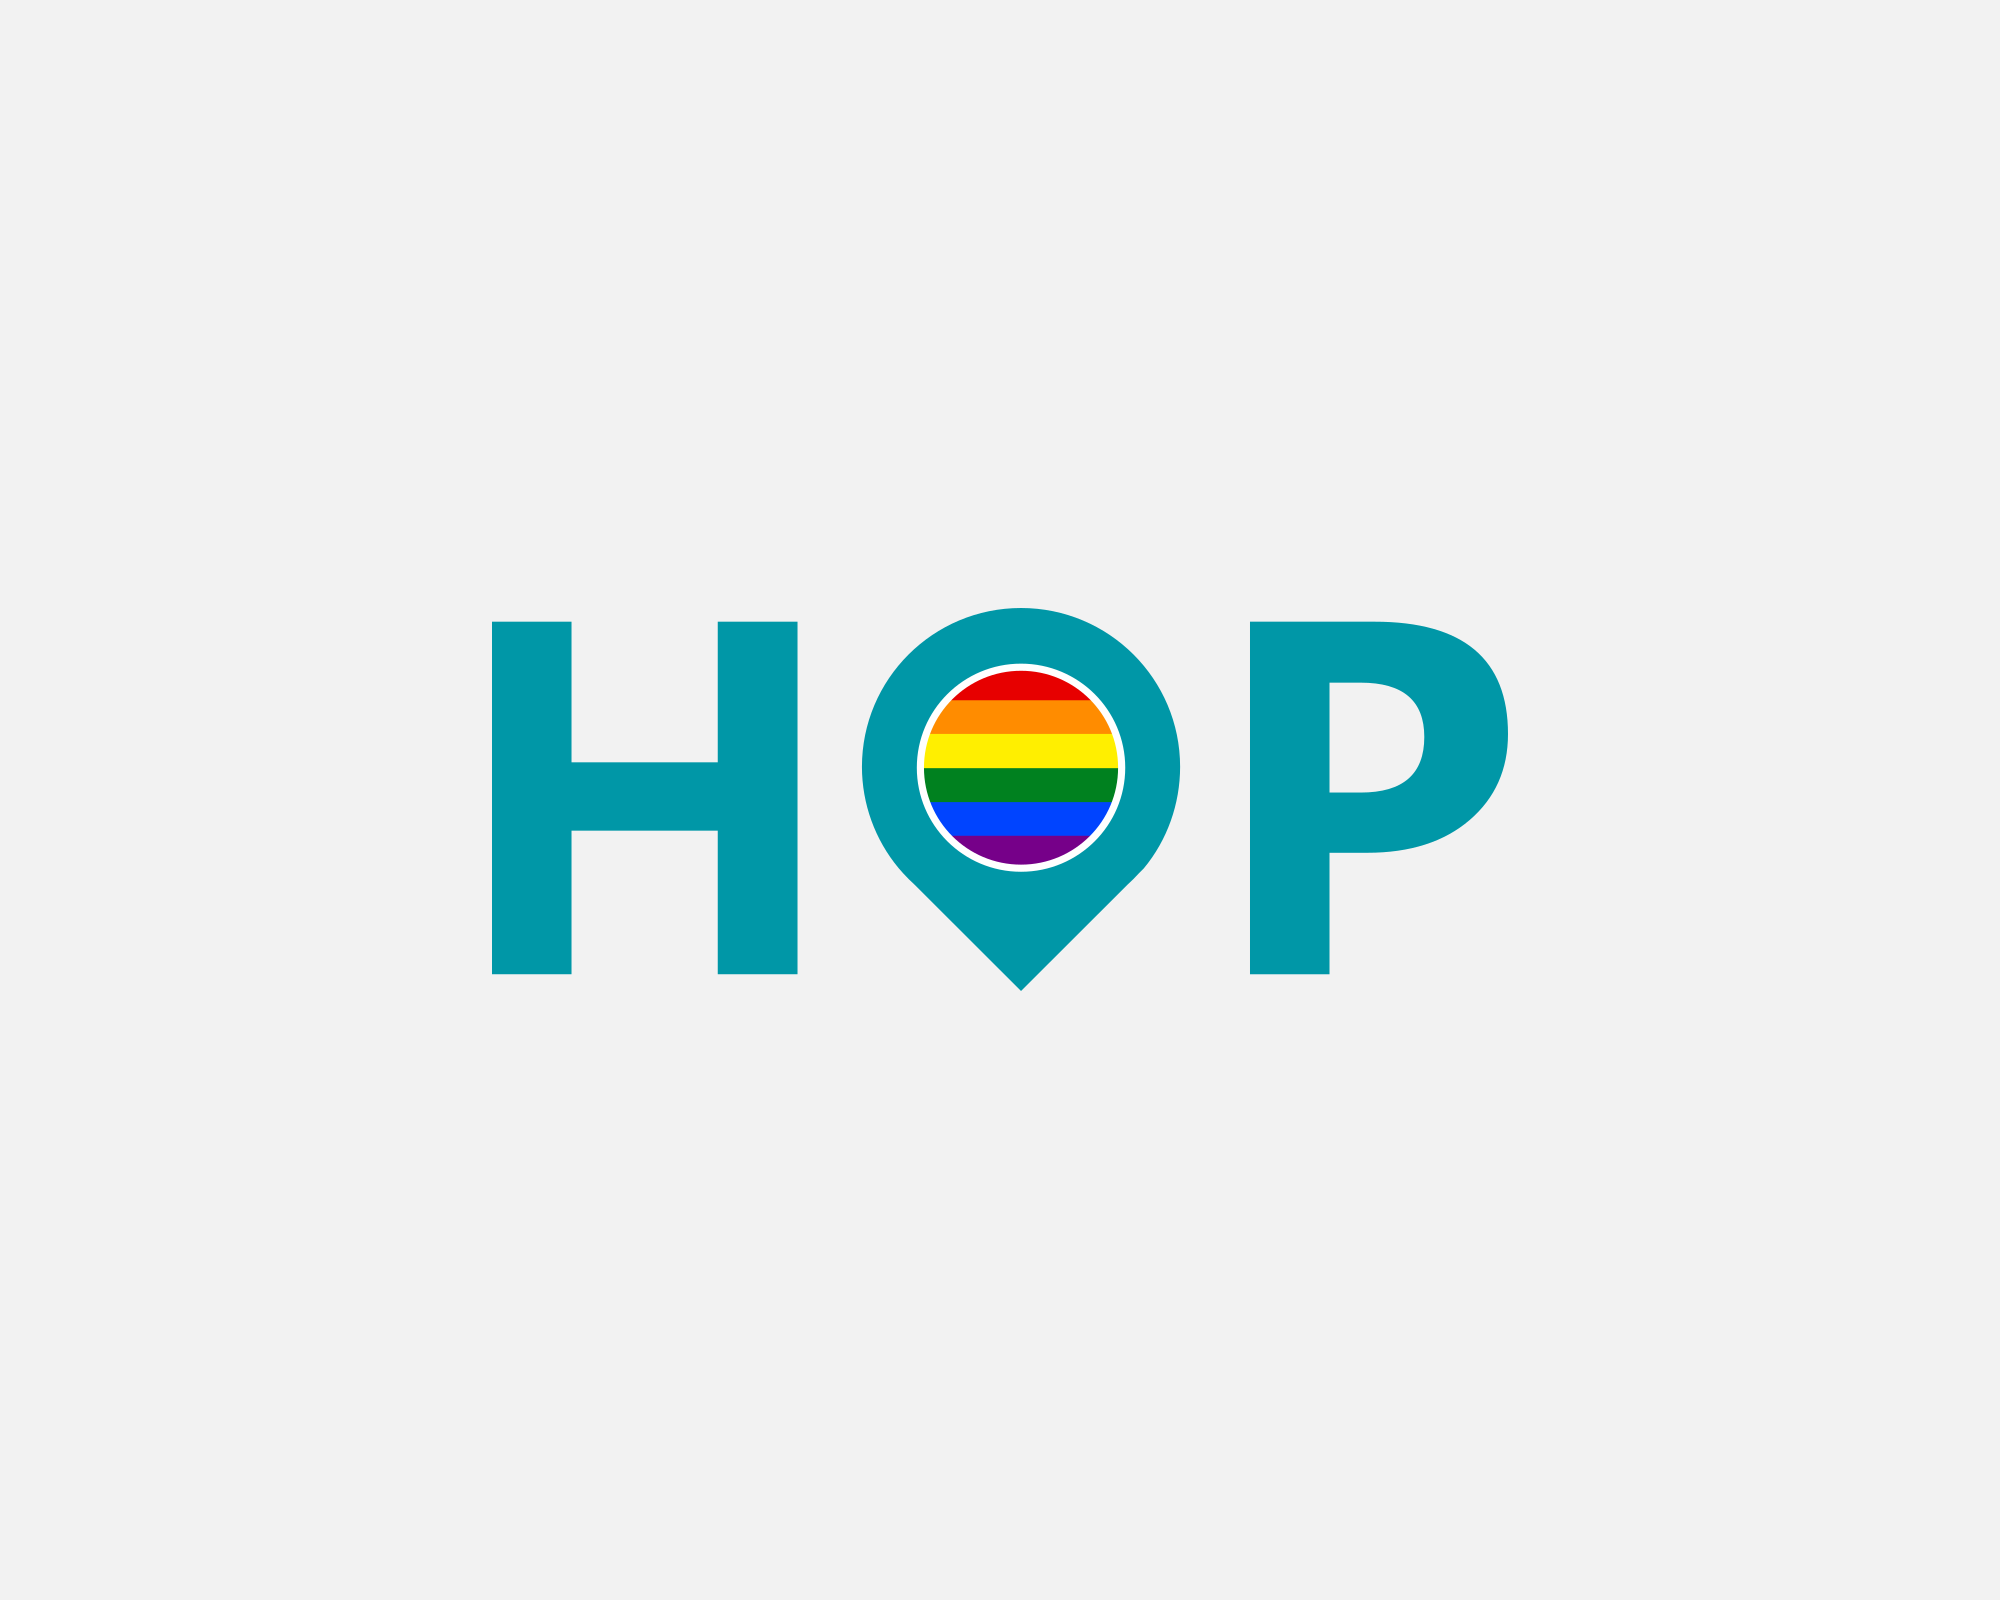 a teal icon which says 'hop', the 'o' is a map marker with rainbow colors